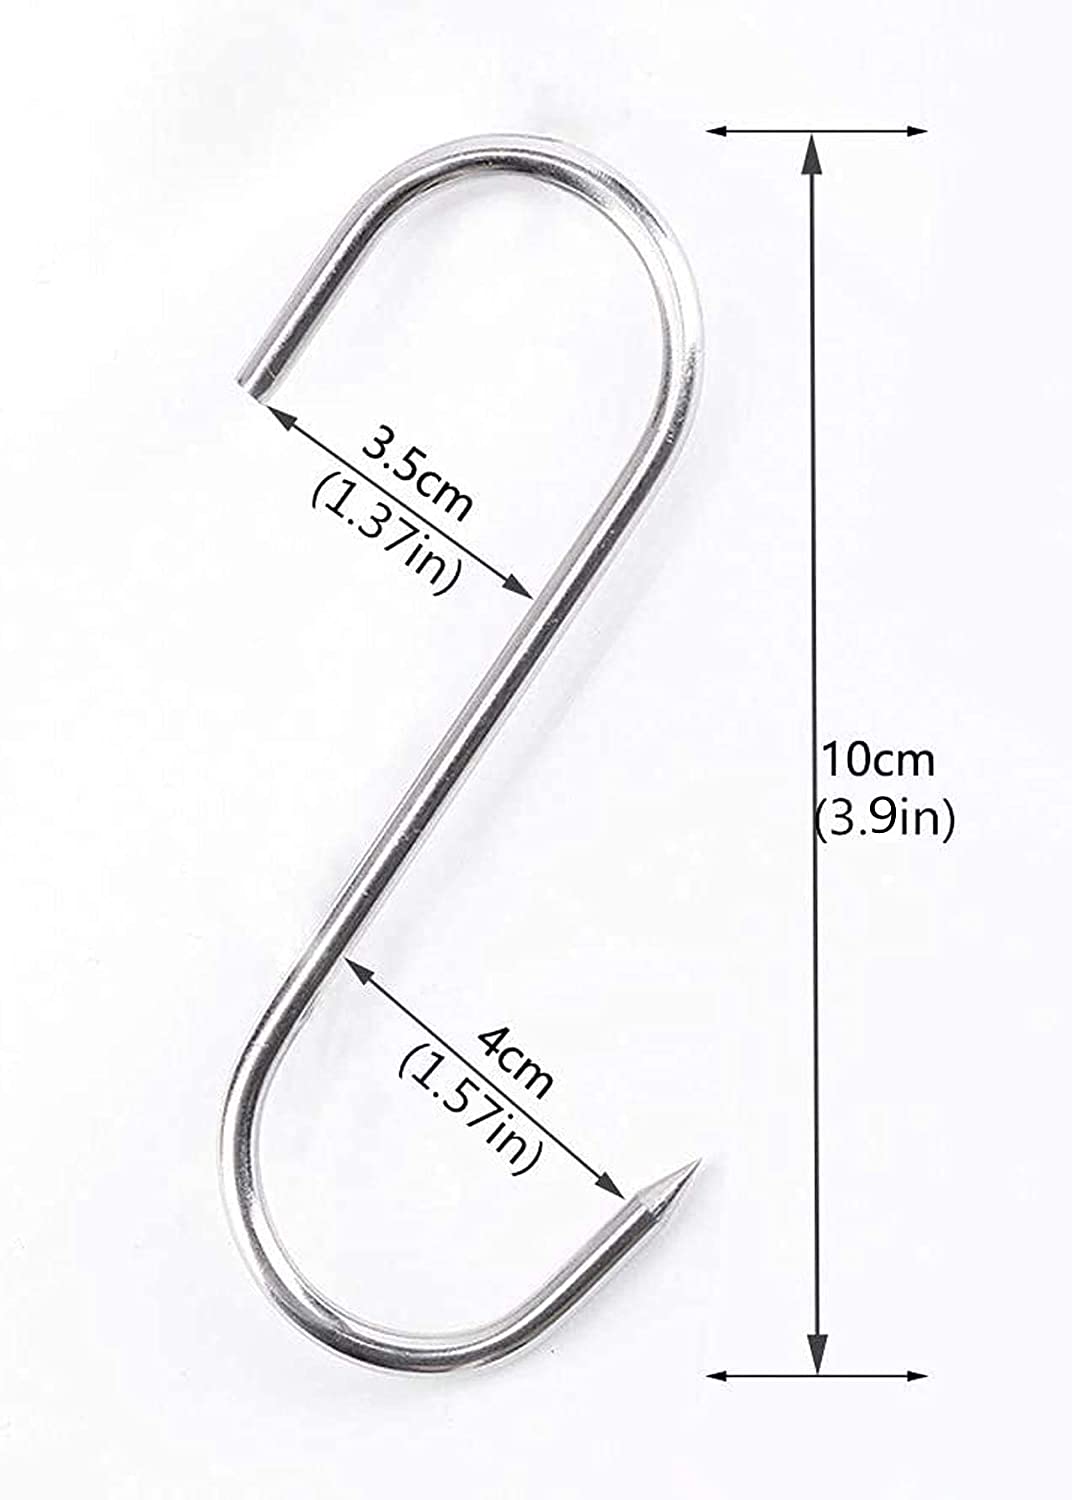 Wholesale s shaped meat hooks for butchering For Hardware And Tools Needs –